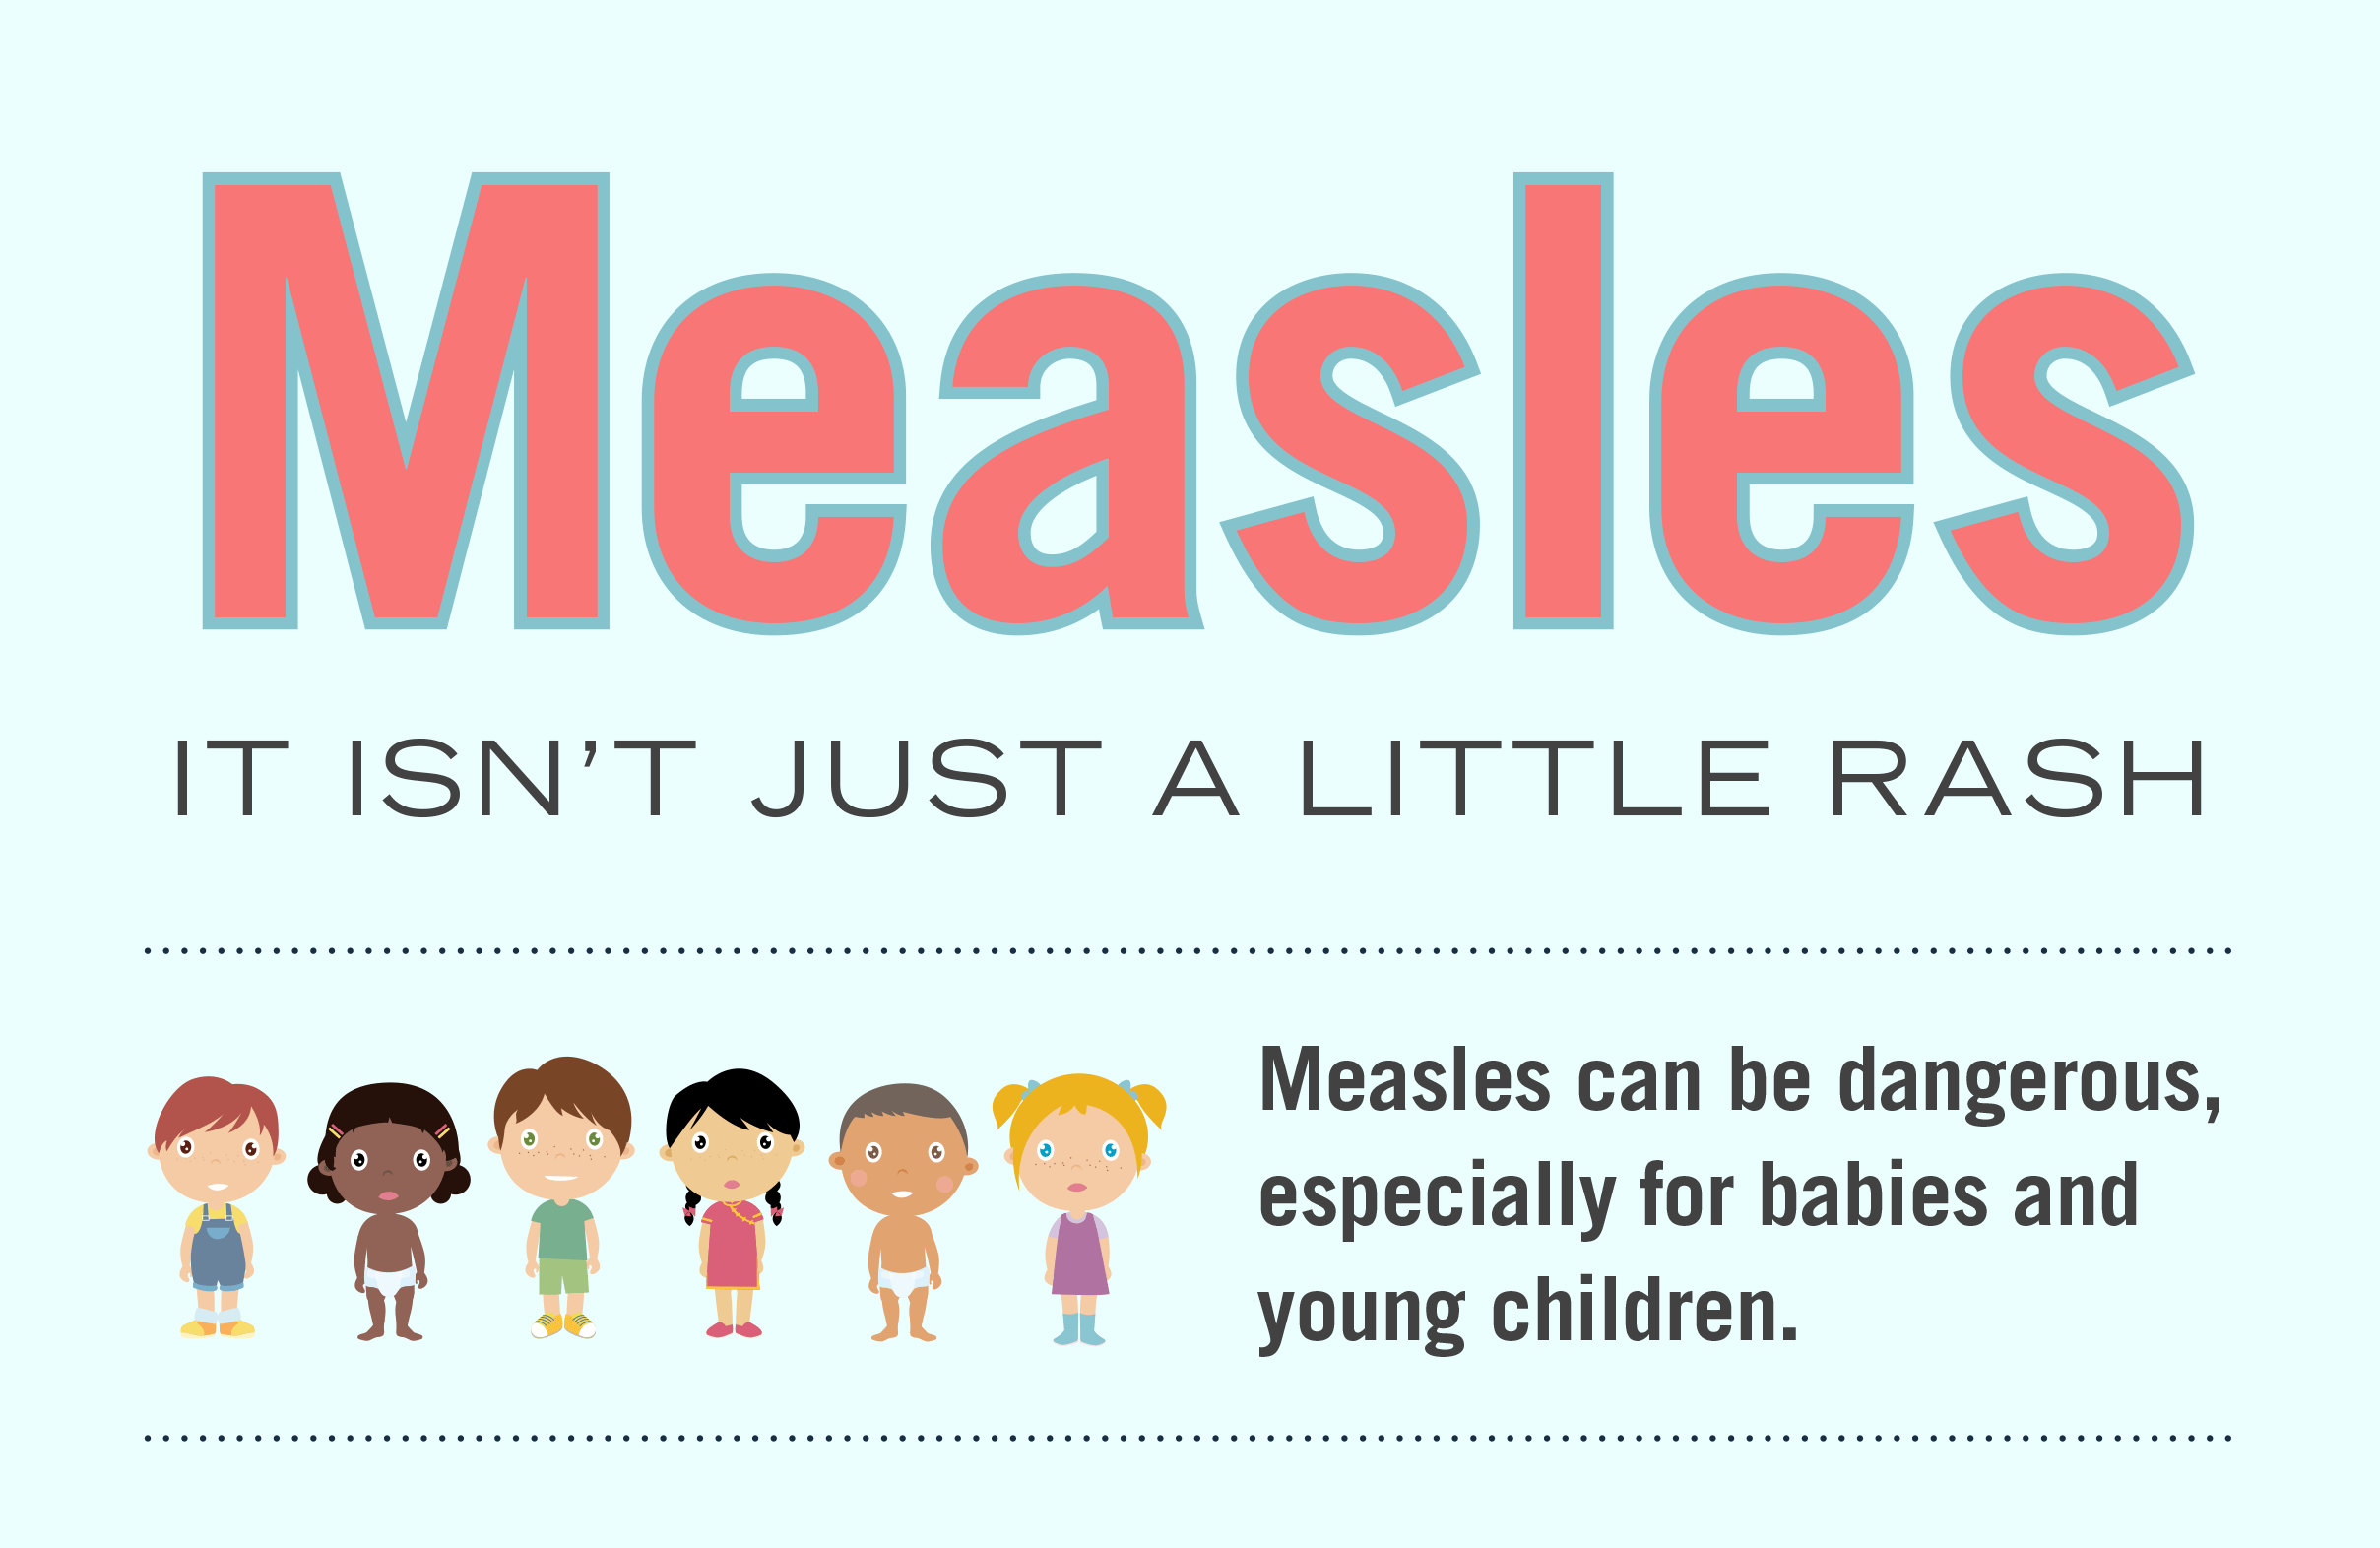 Measles info graphic